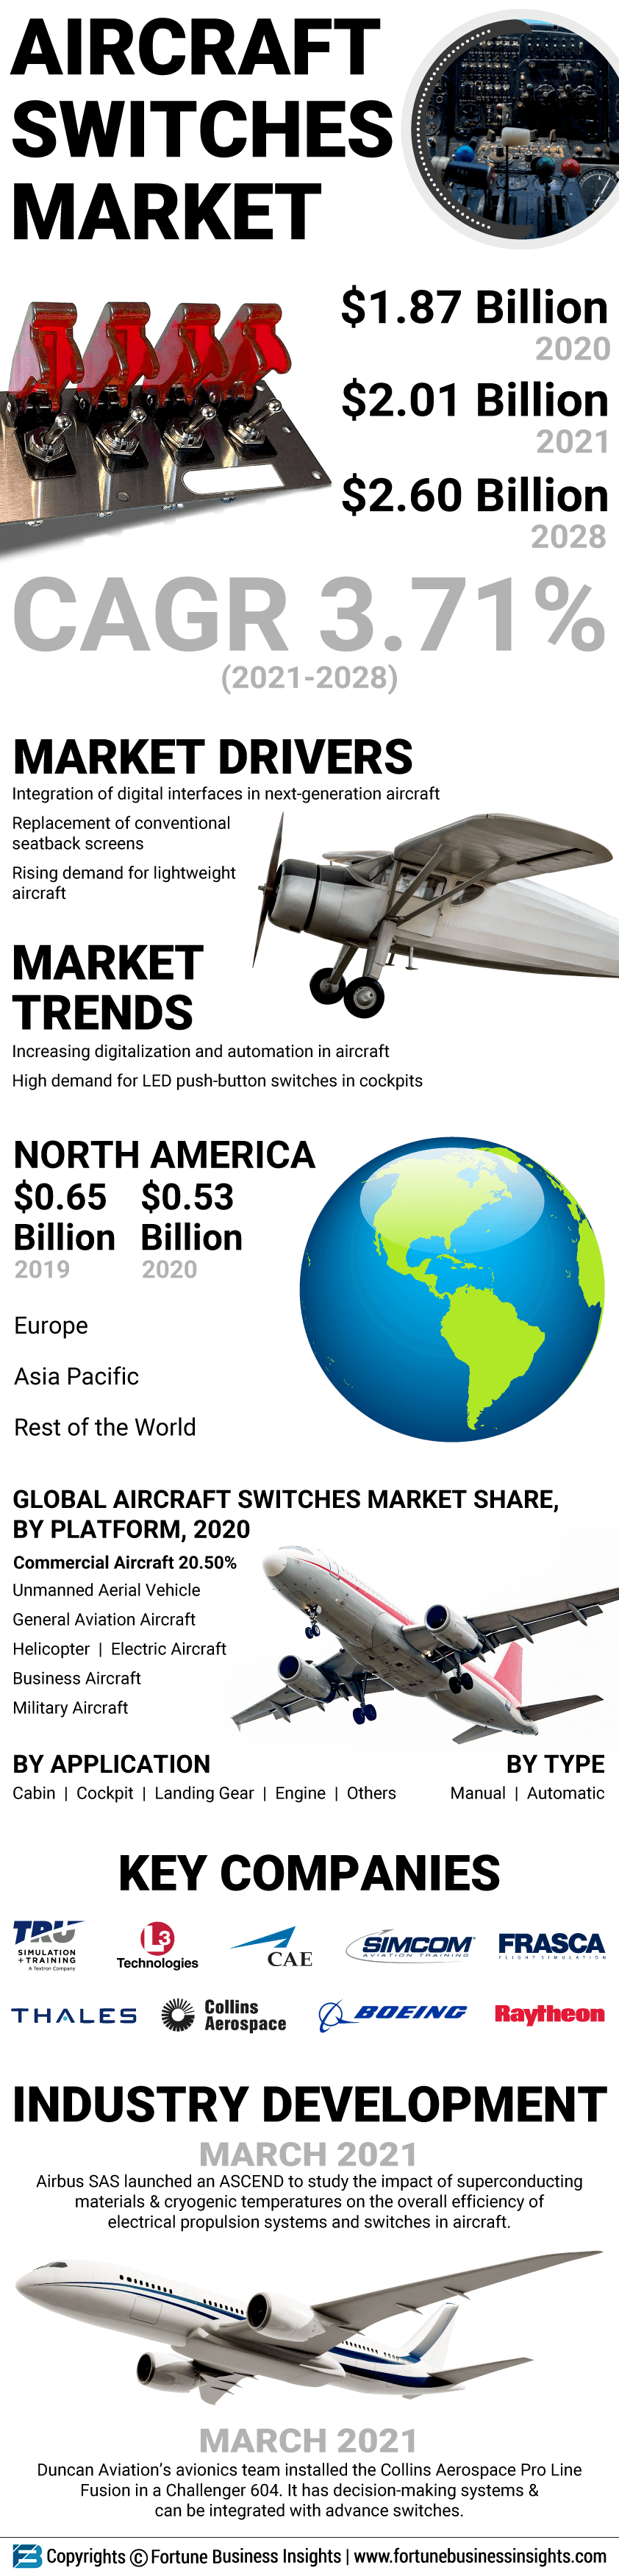 Aircraft Switches Market